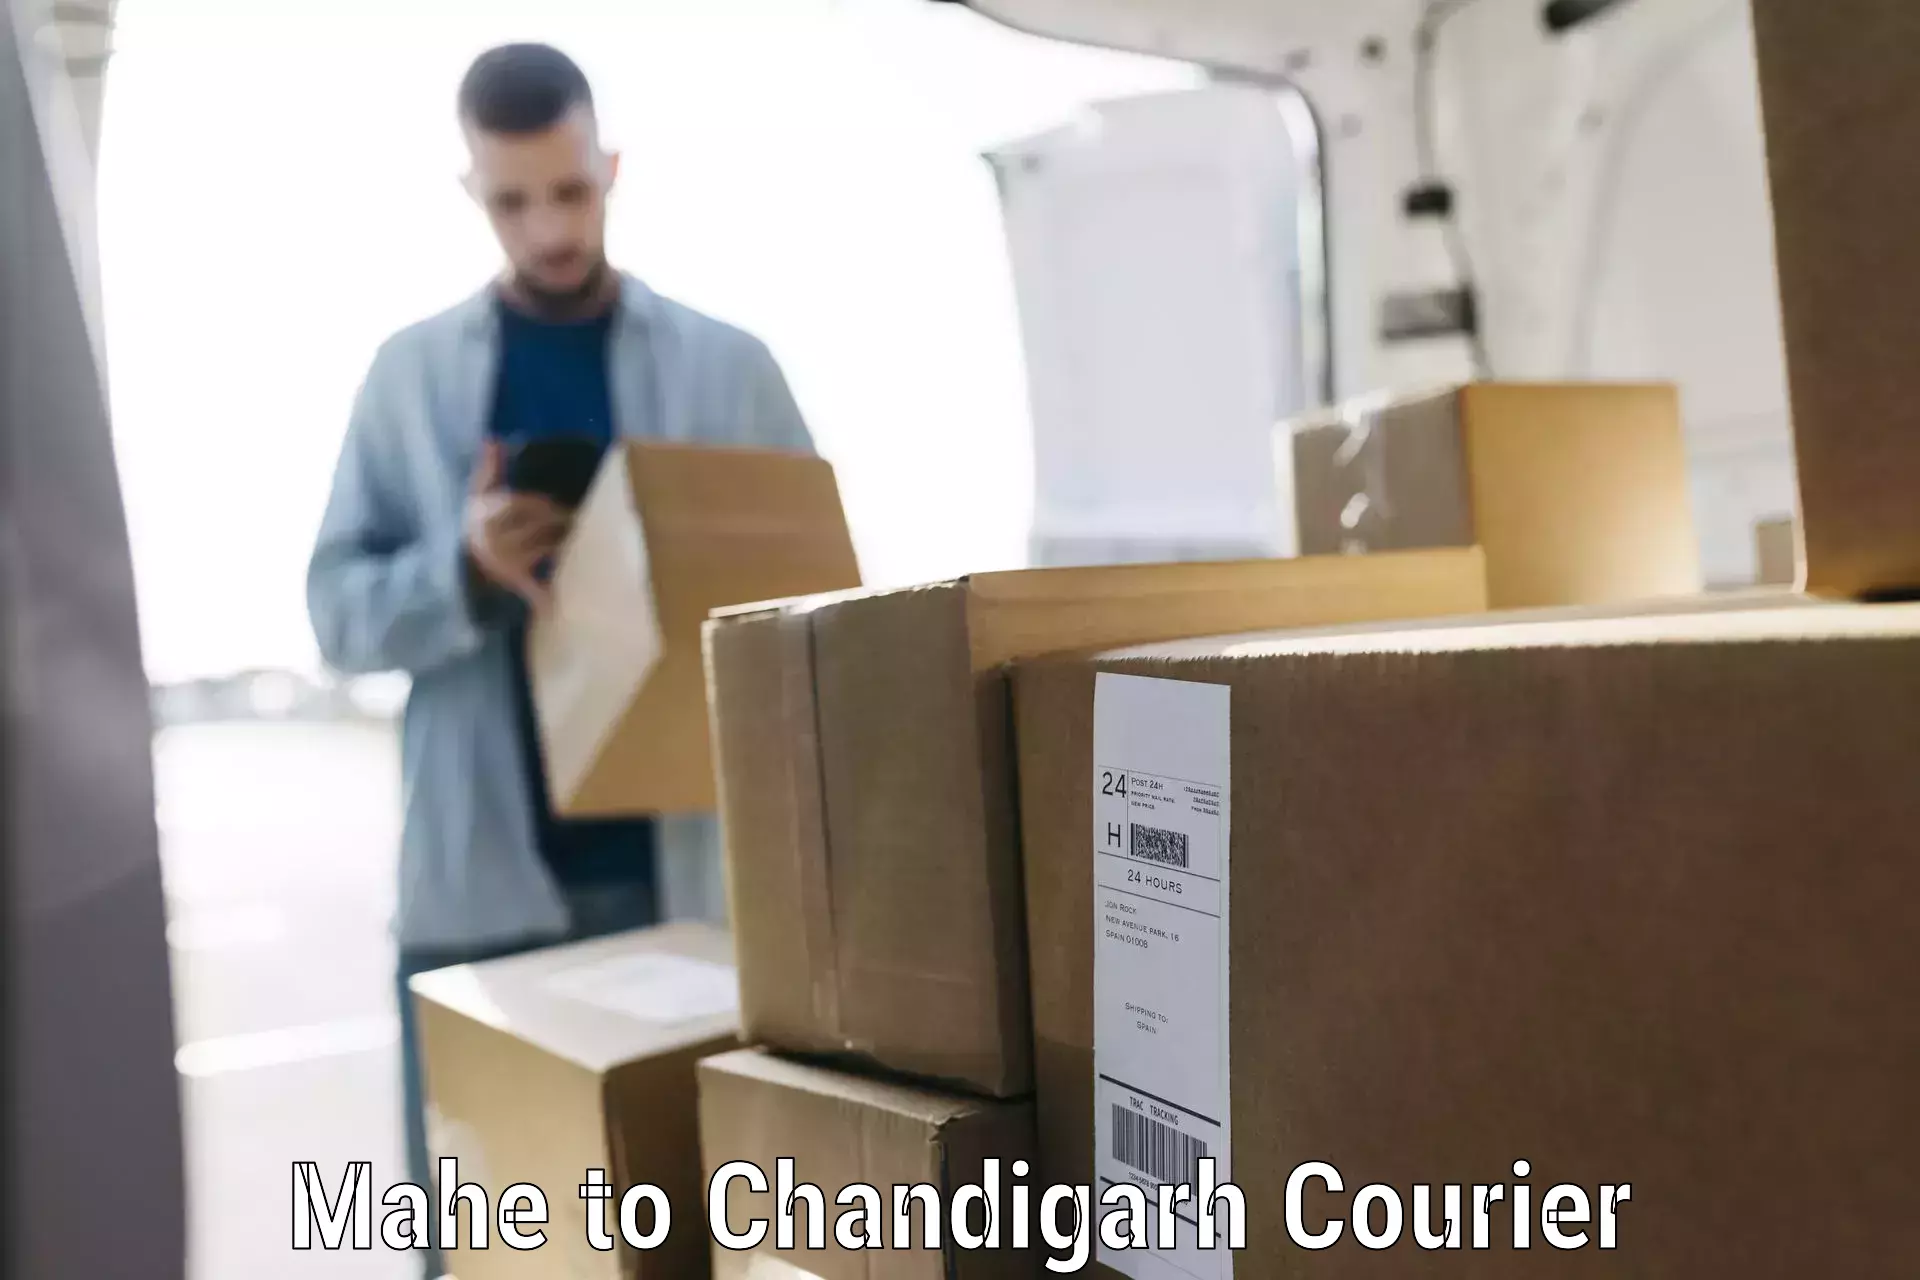 Baggage shipping service Mahe to Chandigarh